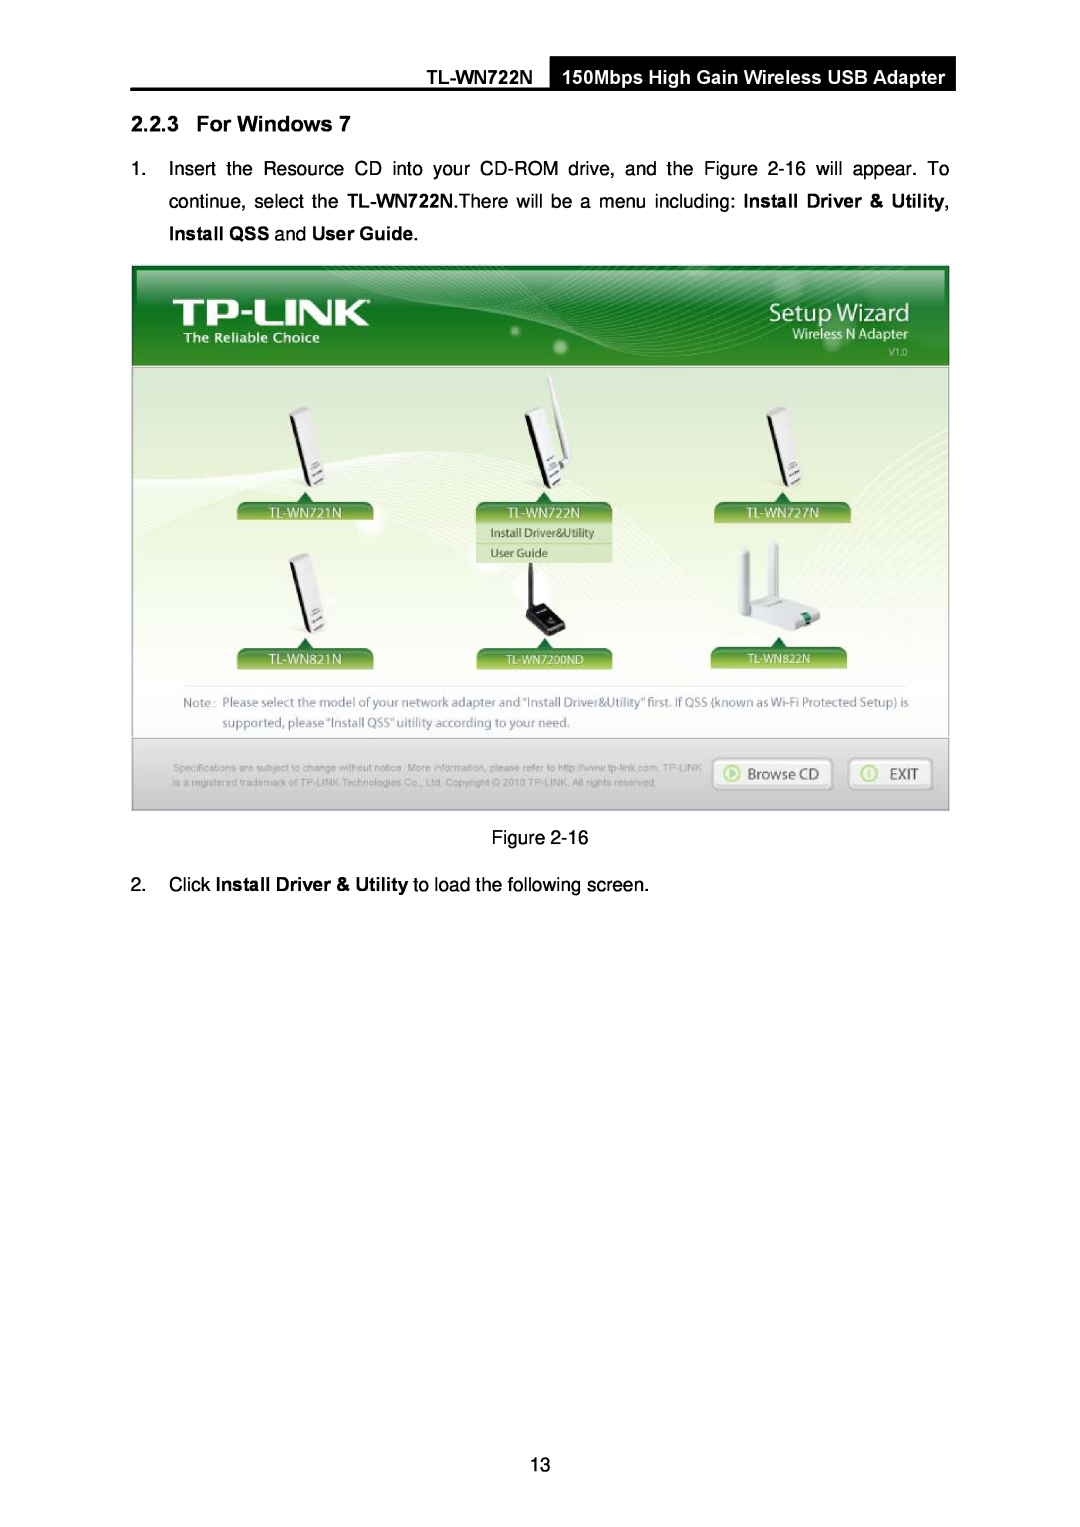 TP-Link manual For Windows, TL-WN722N 150Mbps High Gain Wireless USB Adapter 